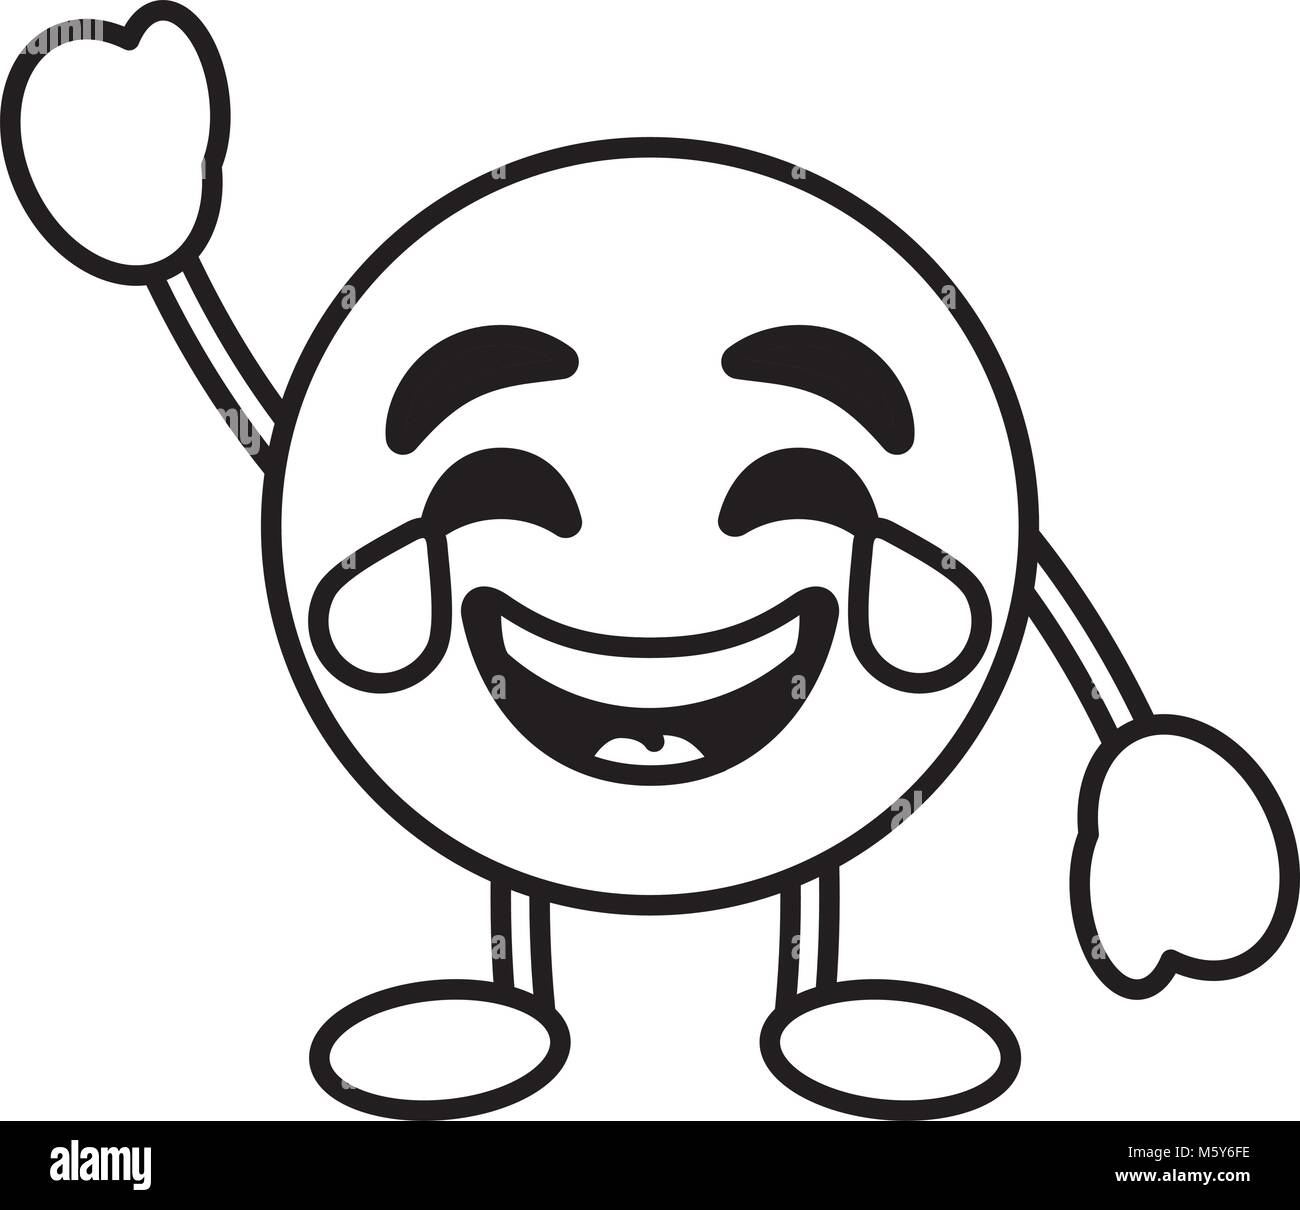 emoticon cartoon face smiling with tears character Stock Vector